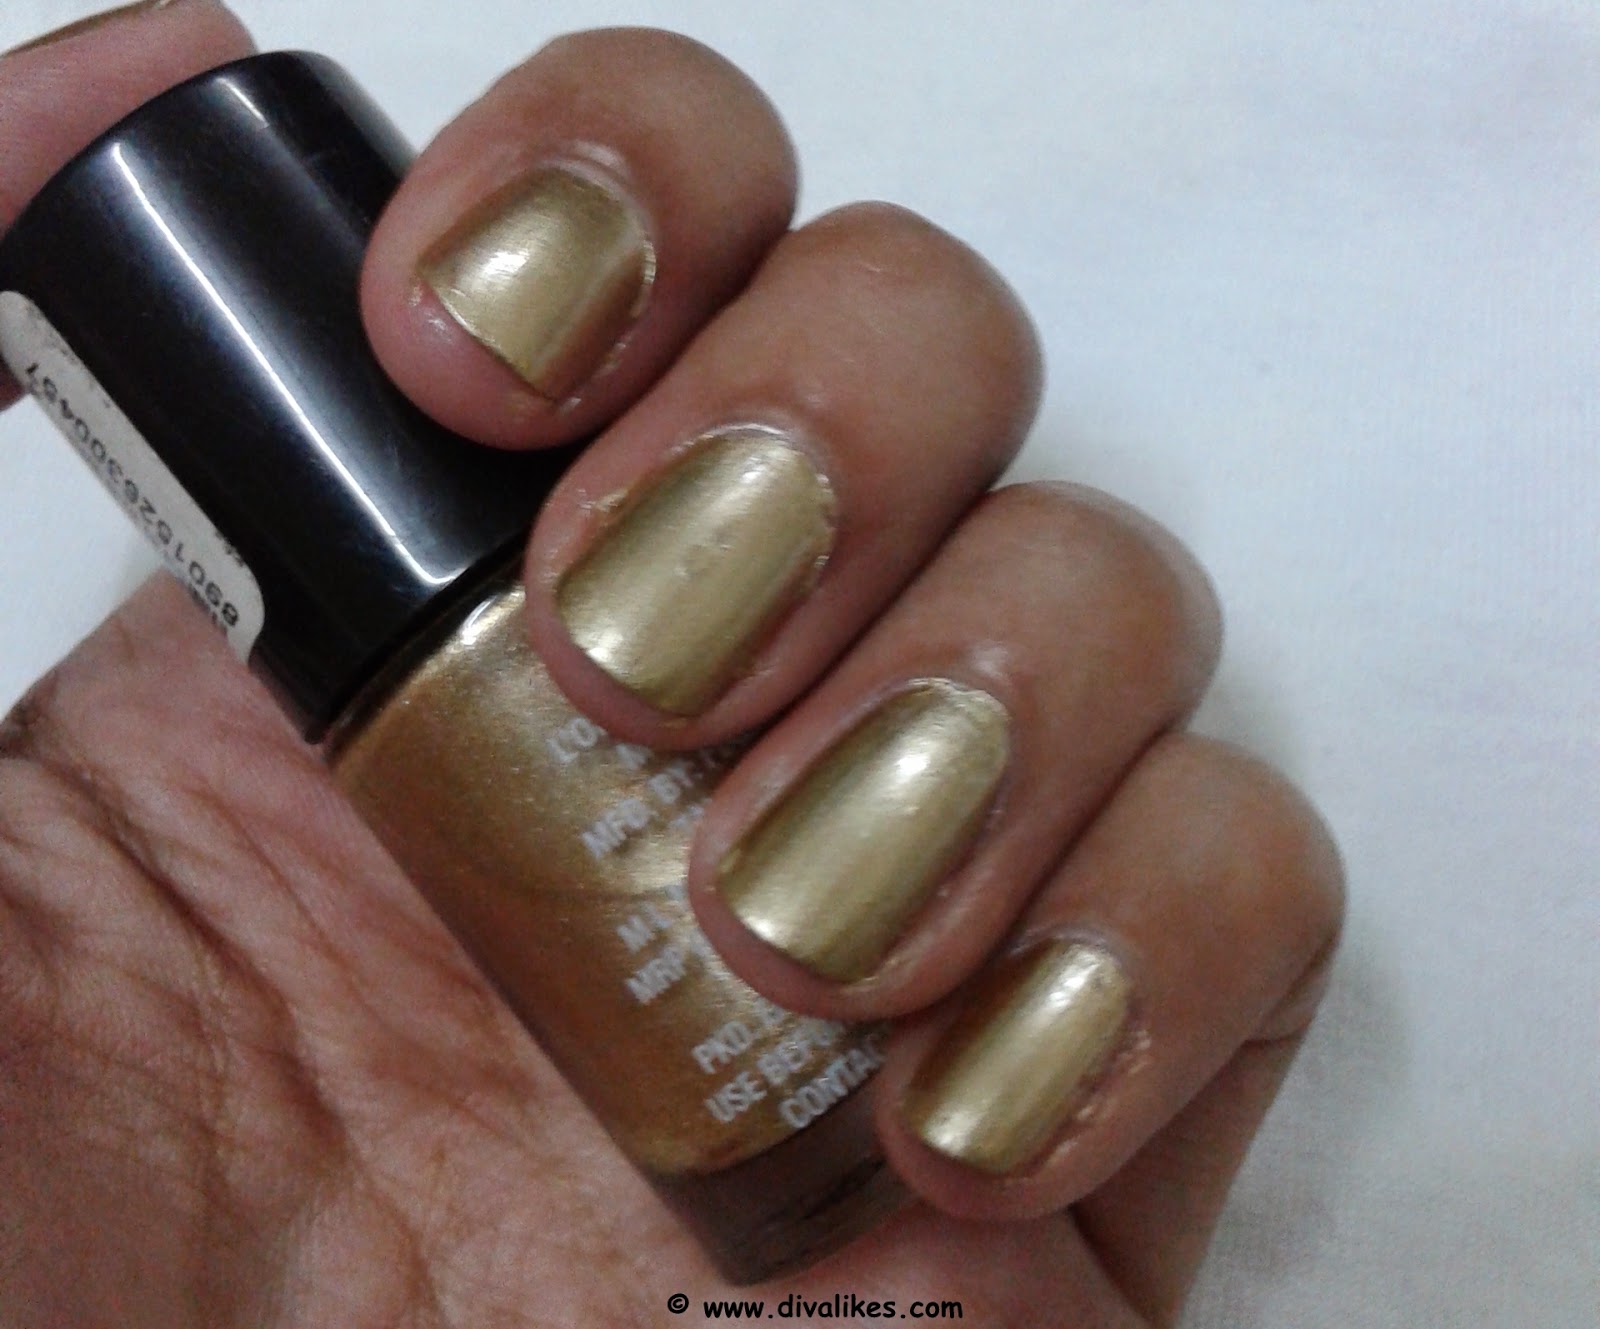 8. Maybelline Color Show Nail Lacquer in Bold Gold - wide 9